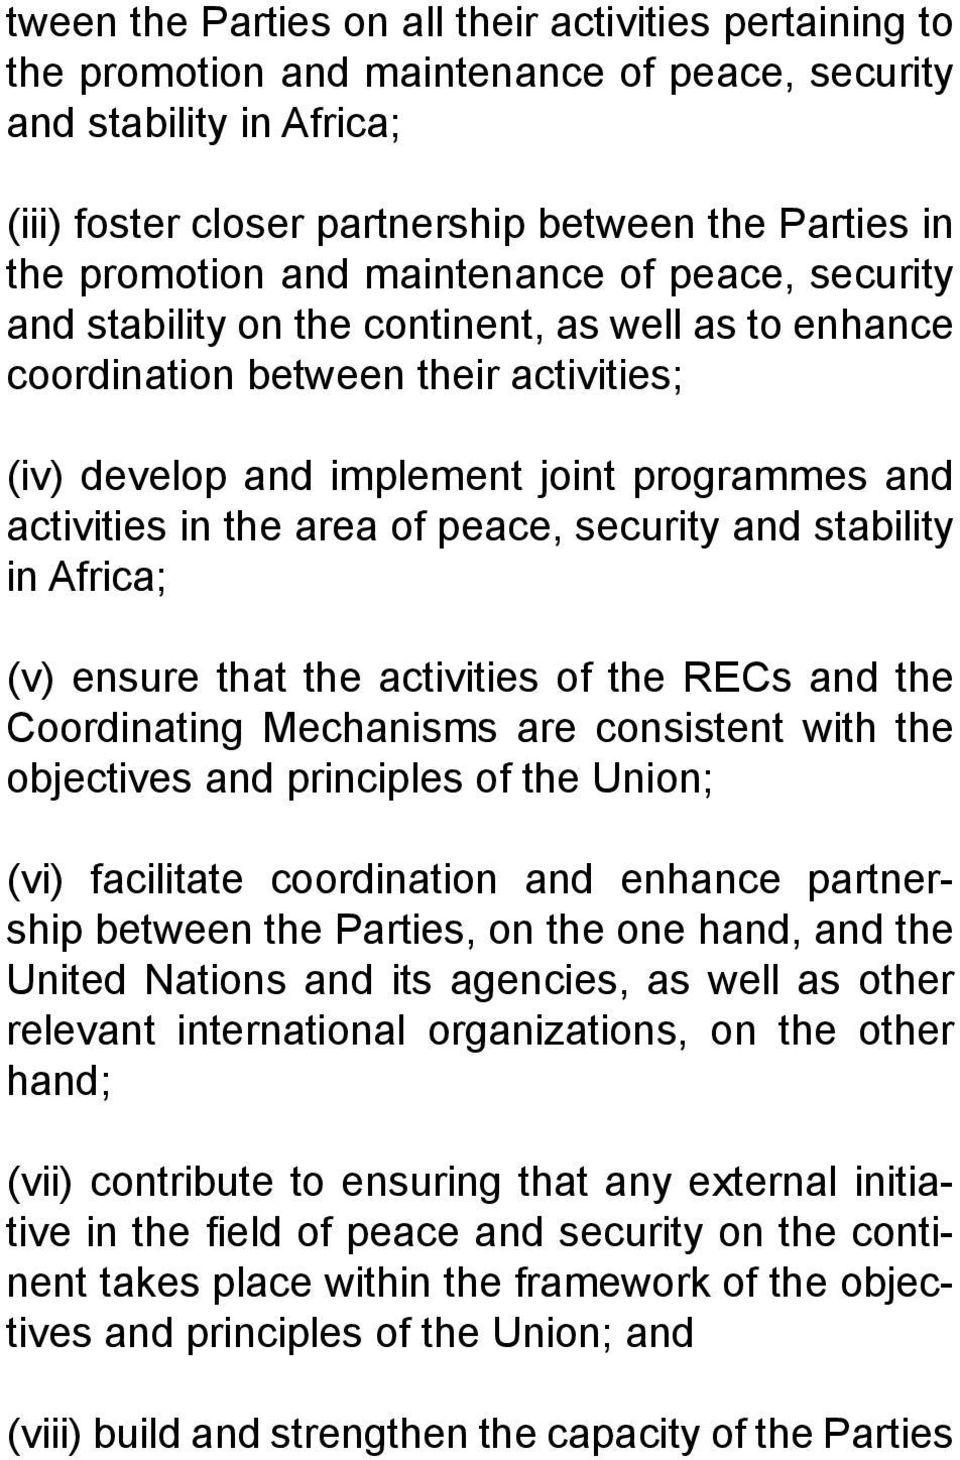 of peace, security and stability in Africa; (v) ensure that the activities of the RECs and the Coordinating Mechanisms are consistent with the objectives and principles of the Union; (vi) facilitate